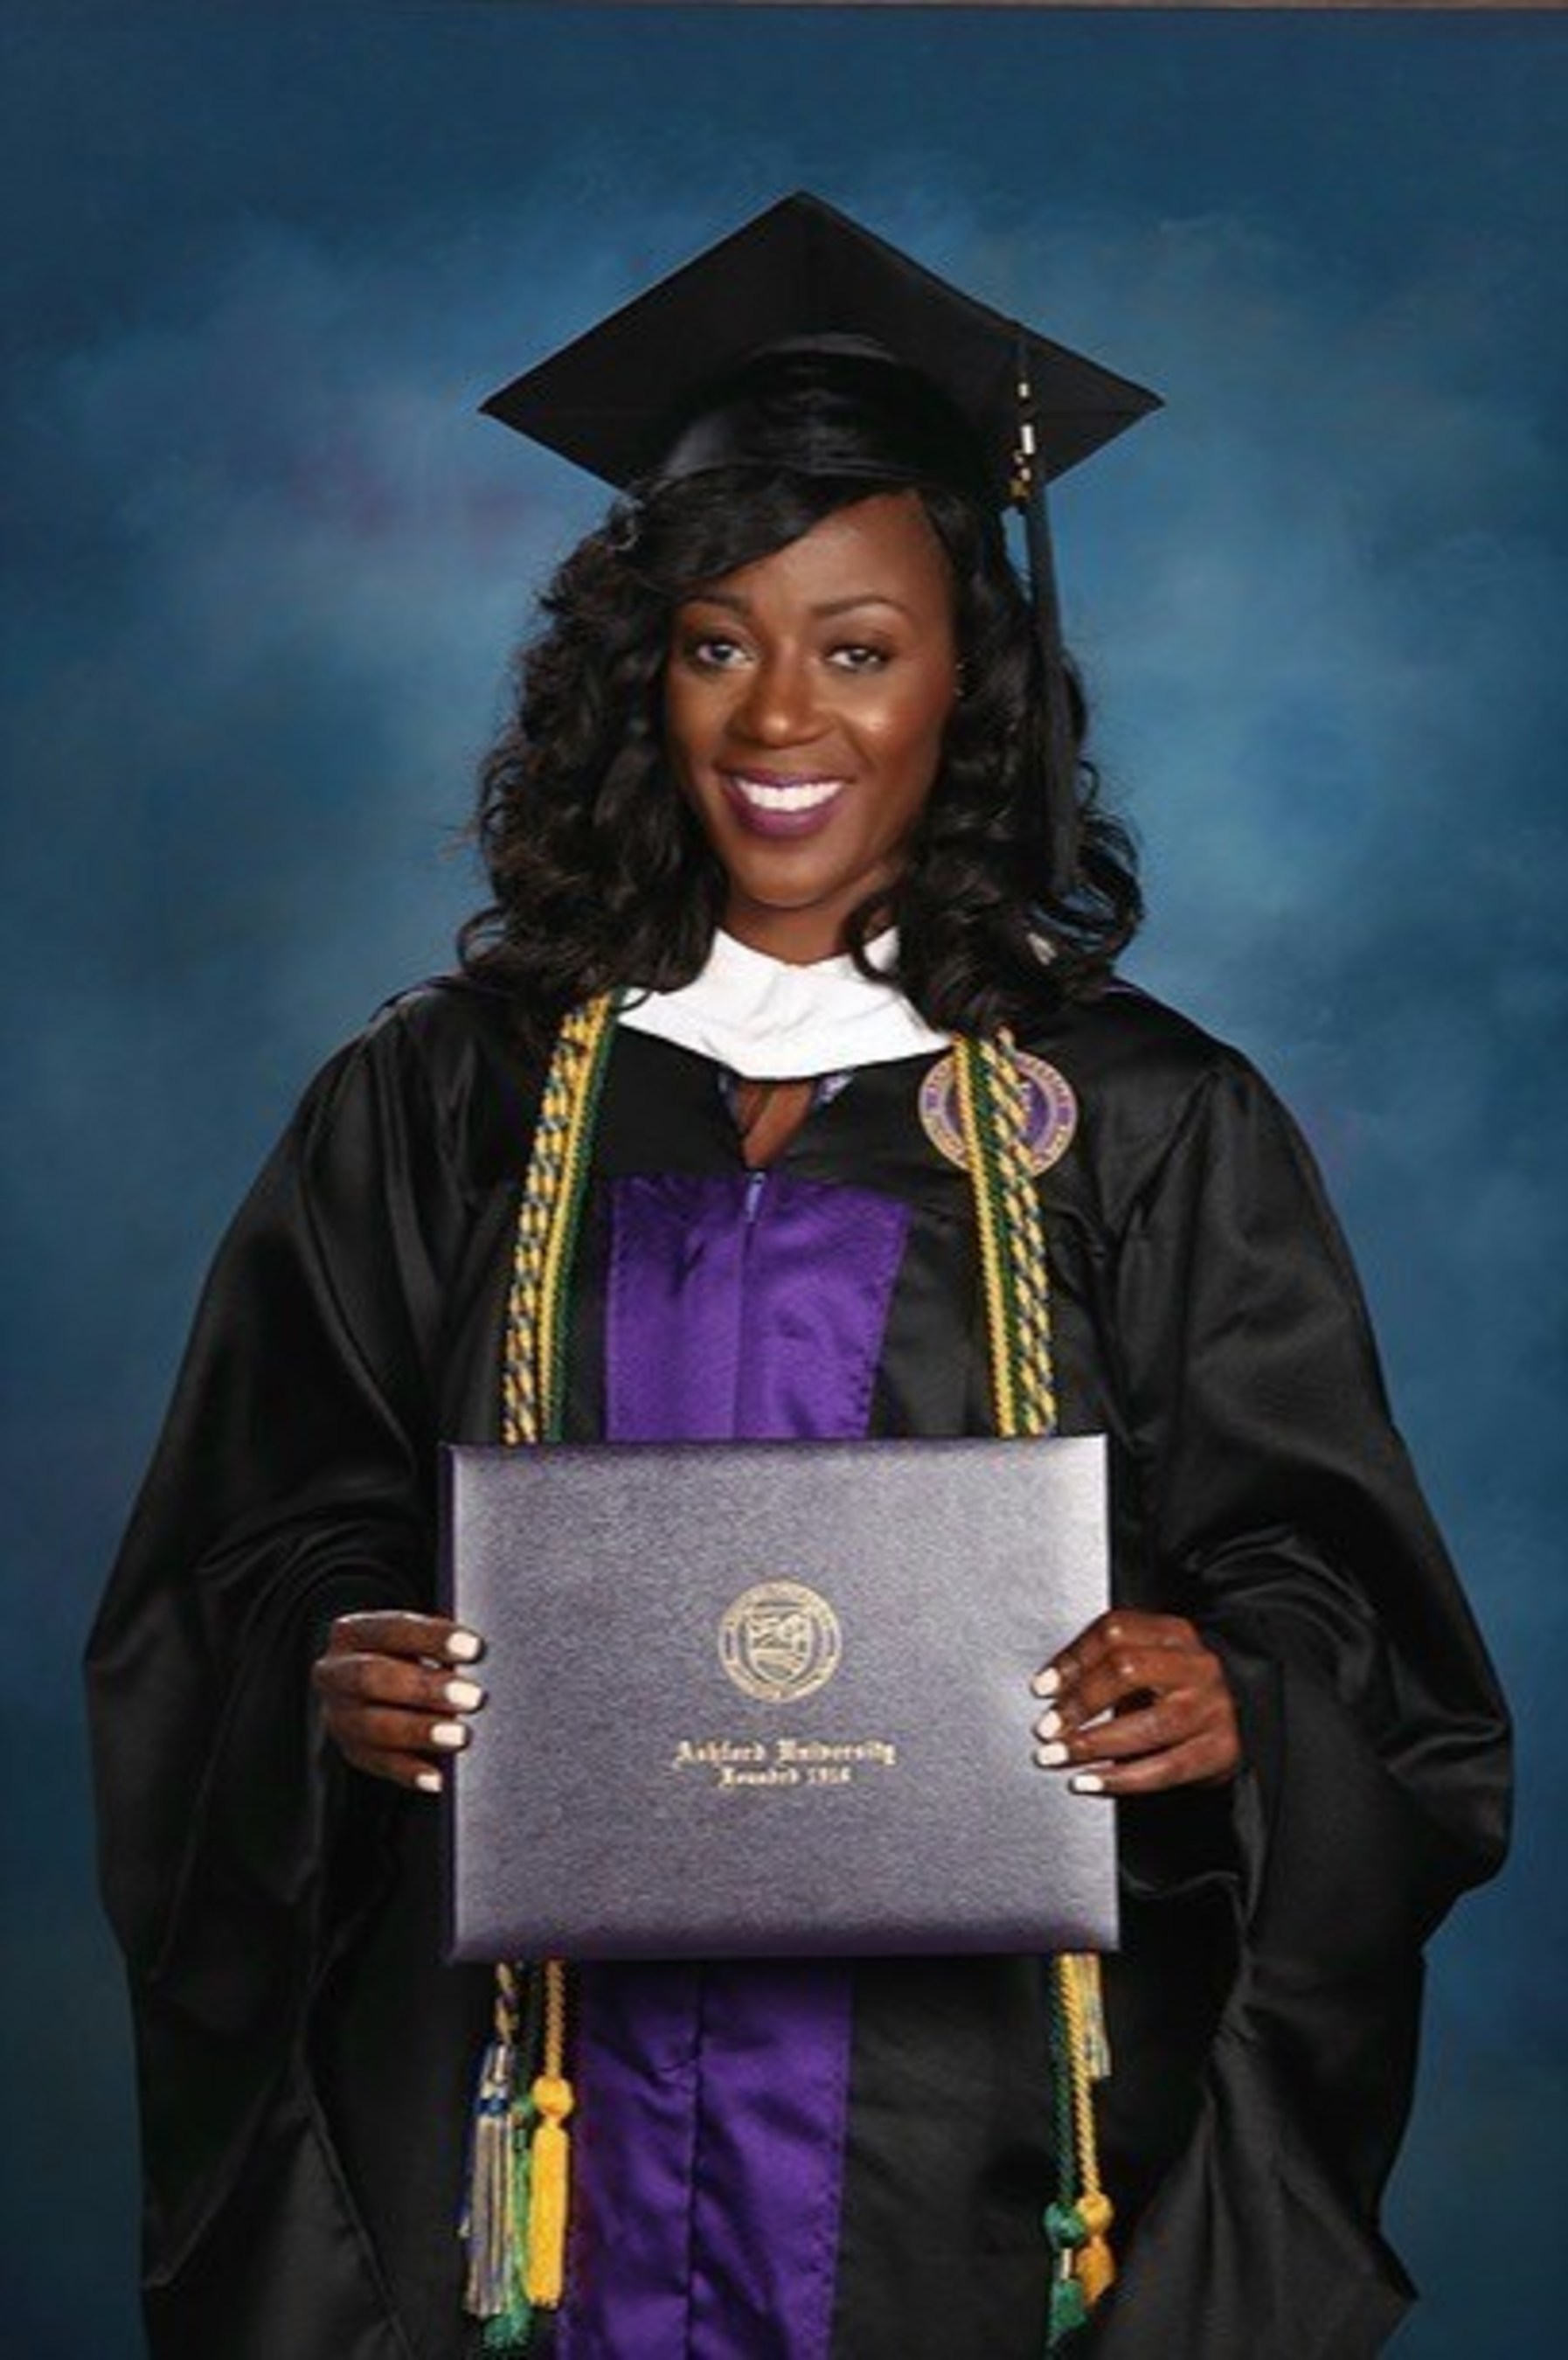 Tiffany Barthelmy is Ashford University's Outstanding Alum of the Month.